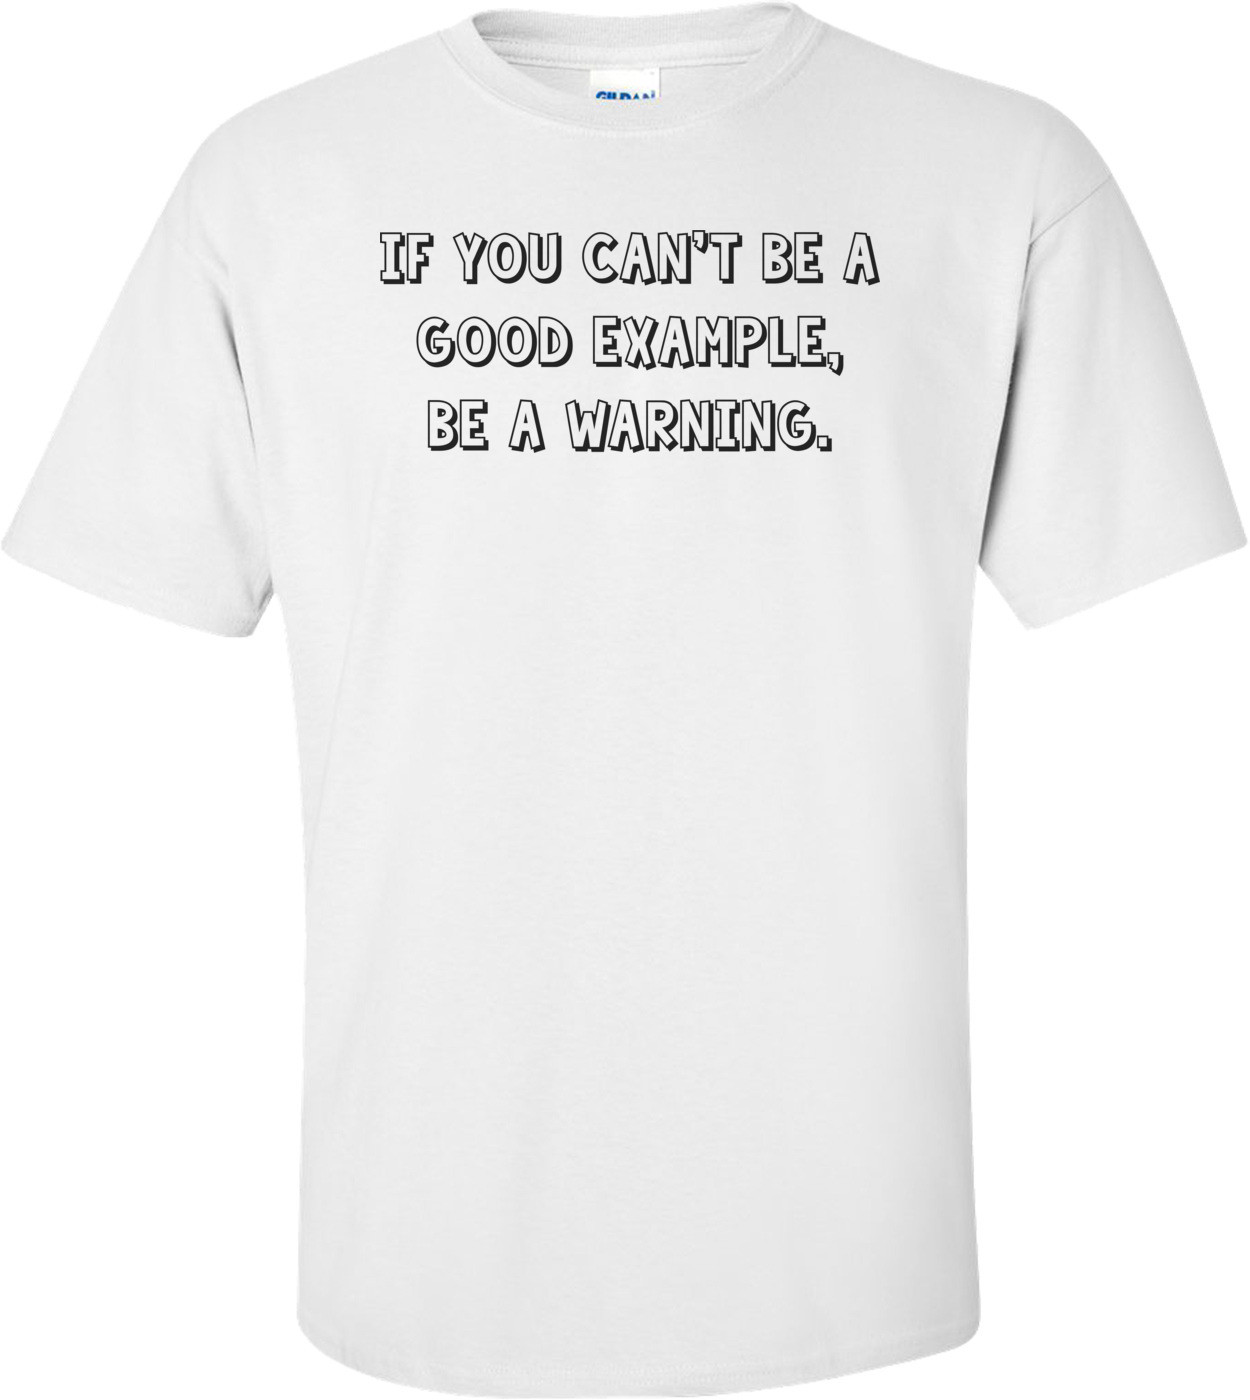 If you can't be a good example, be a warning. Shirt